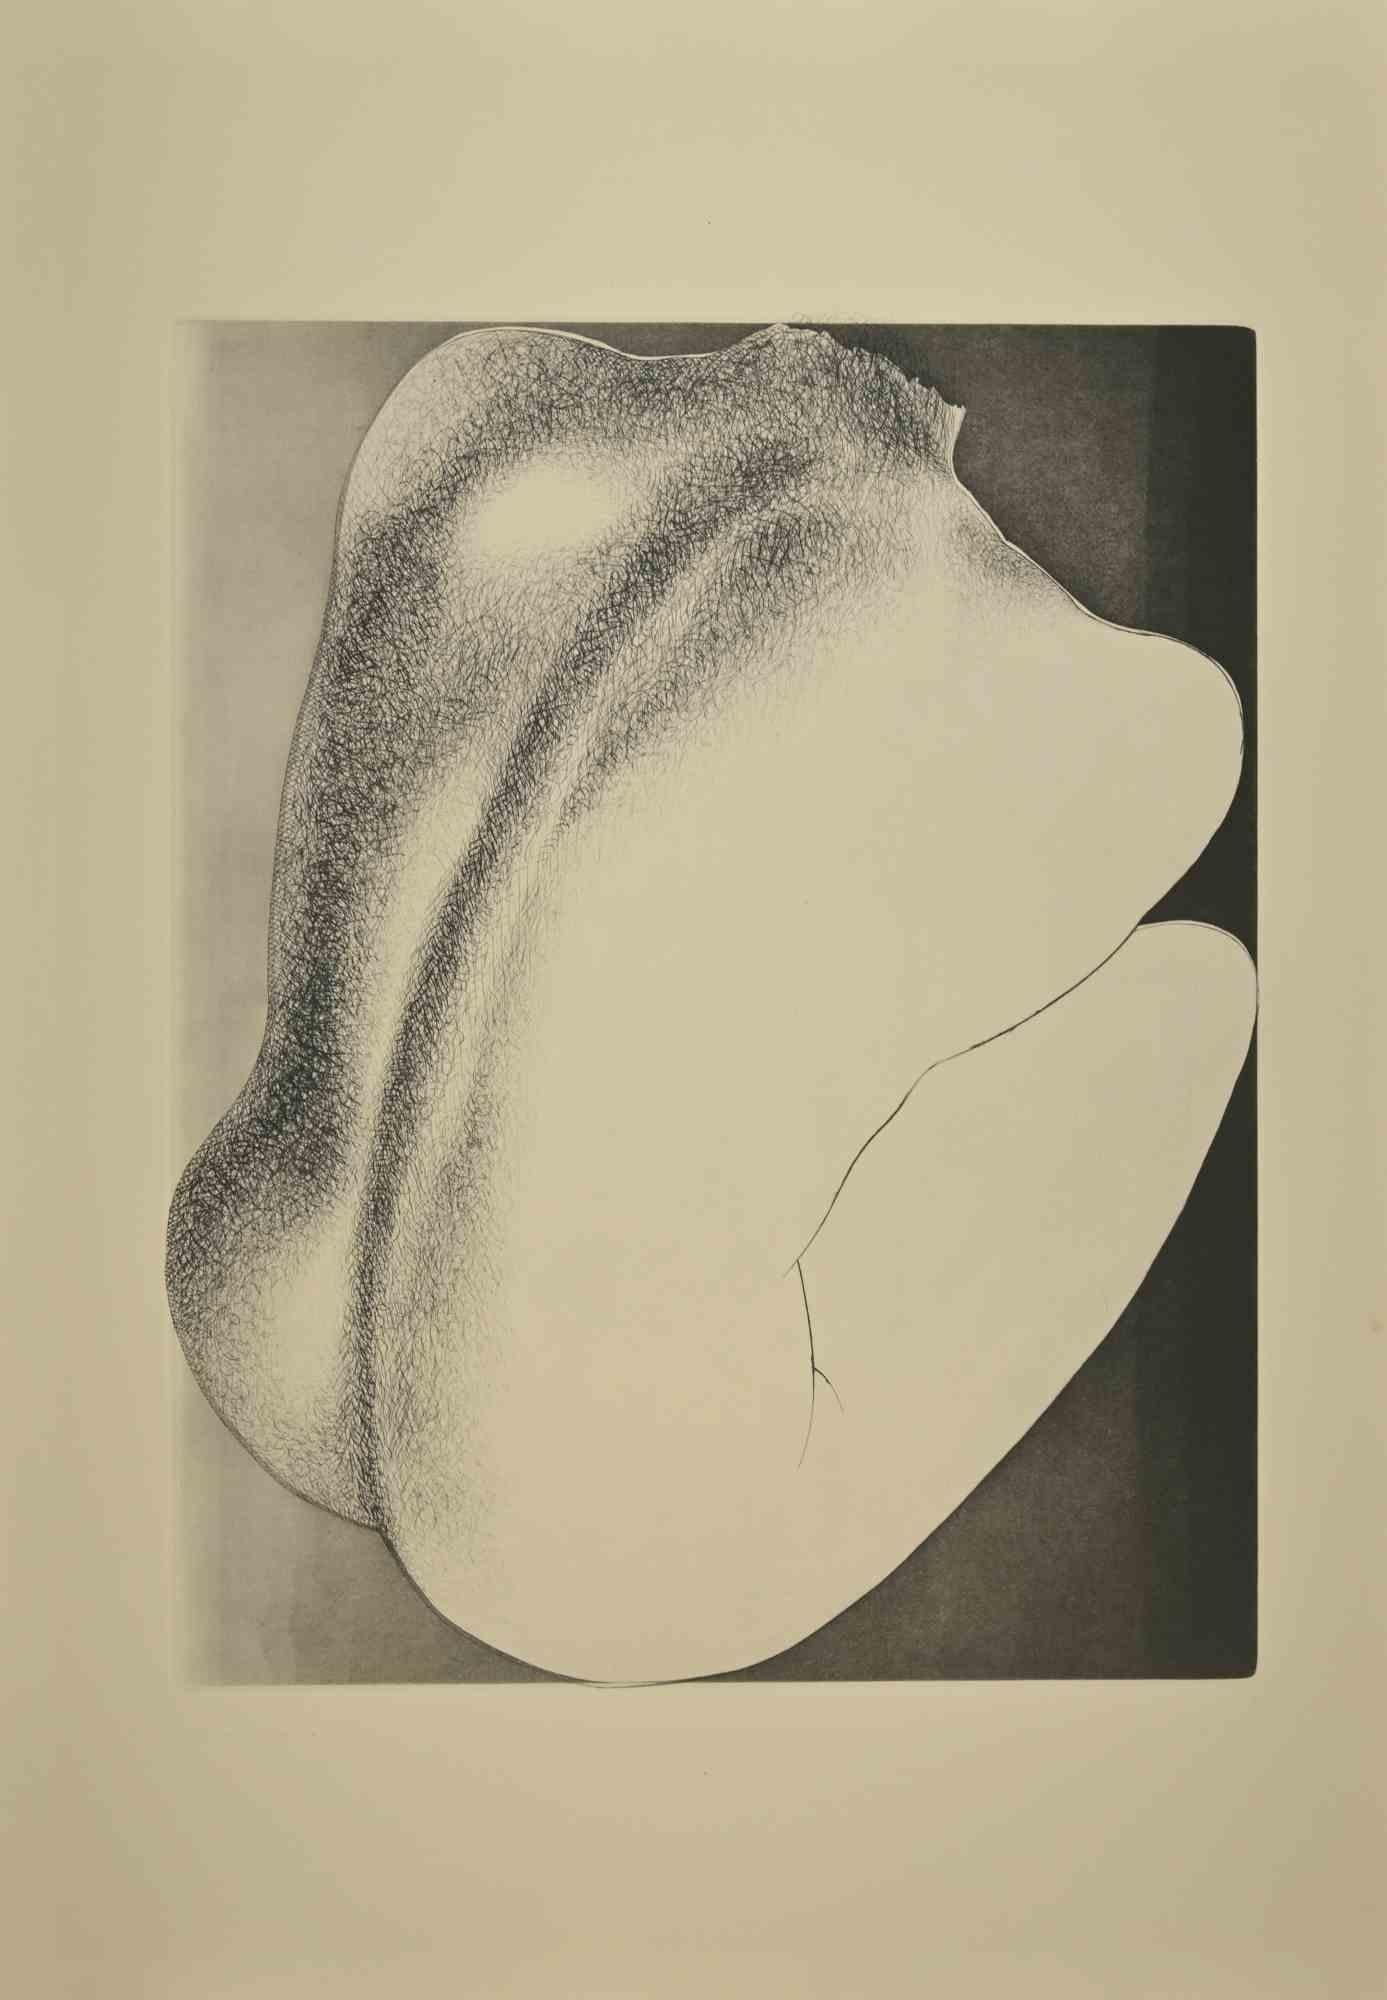 Woman from Shoulders  is a black and white etching on paper, realized by the Italian artist  Giacomo Porzano (1925-2006).

Sheet dimension:75 x 53 cm

In good condition.

This contemporary piece representing the back of a nude woman, with strong